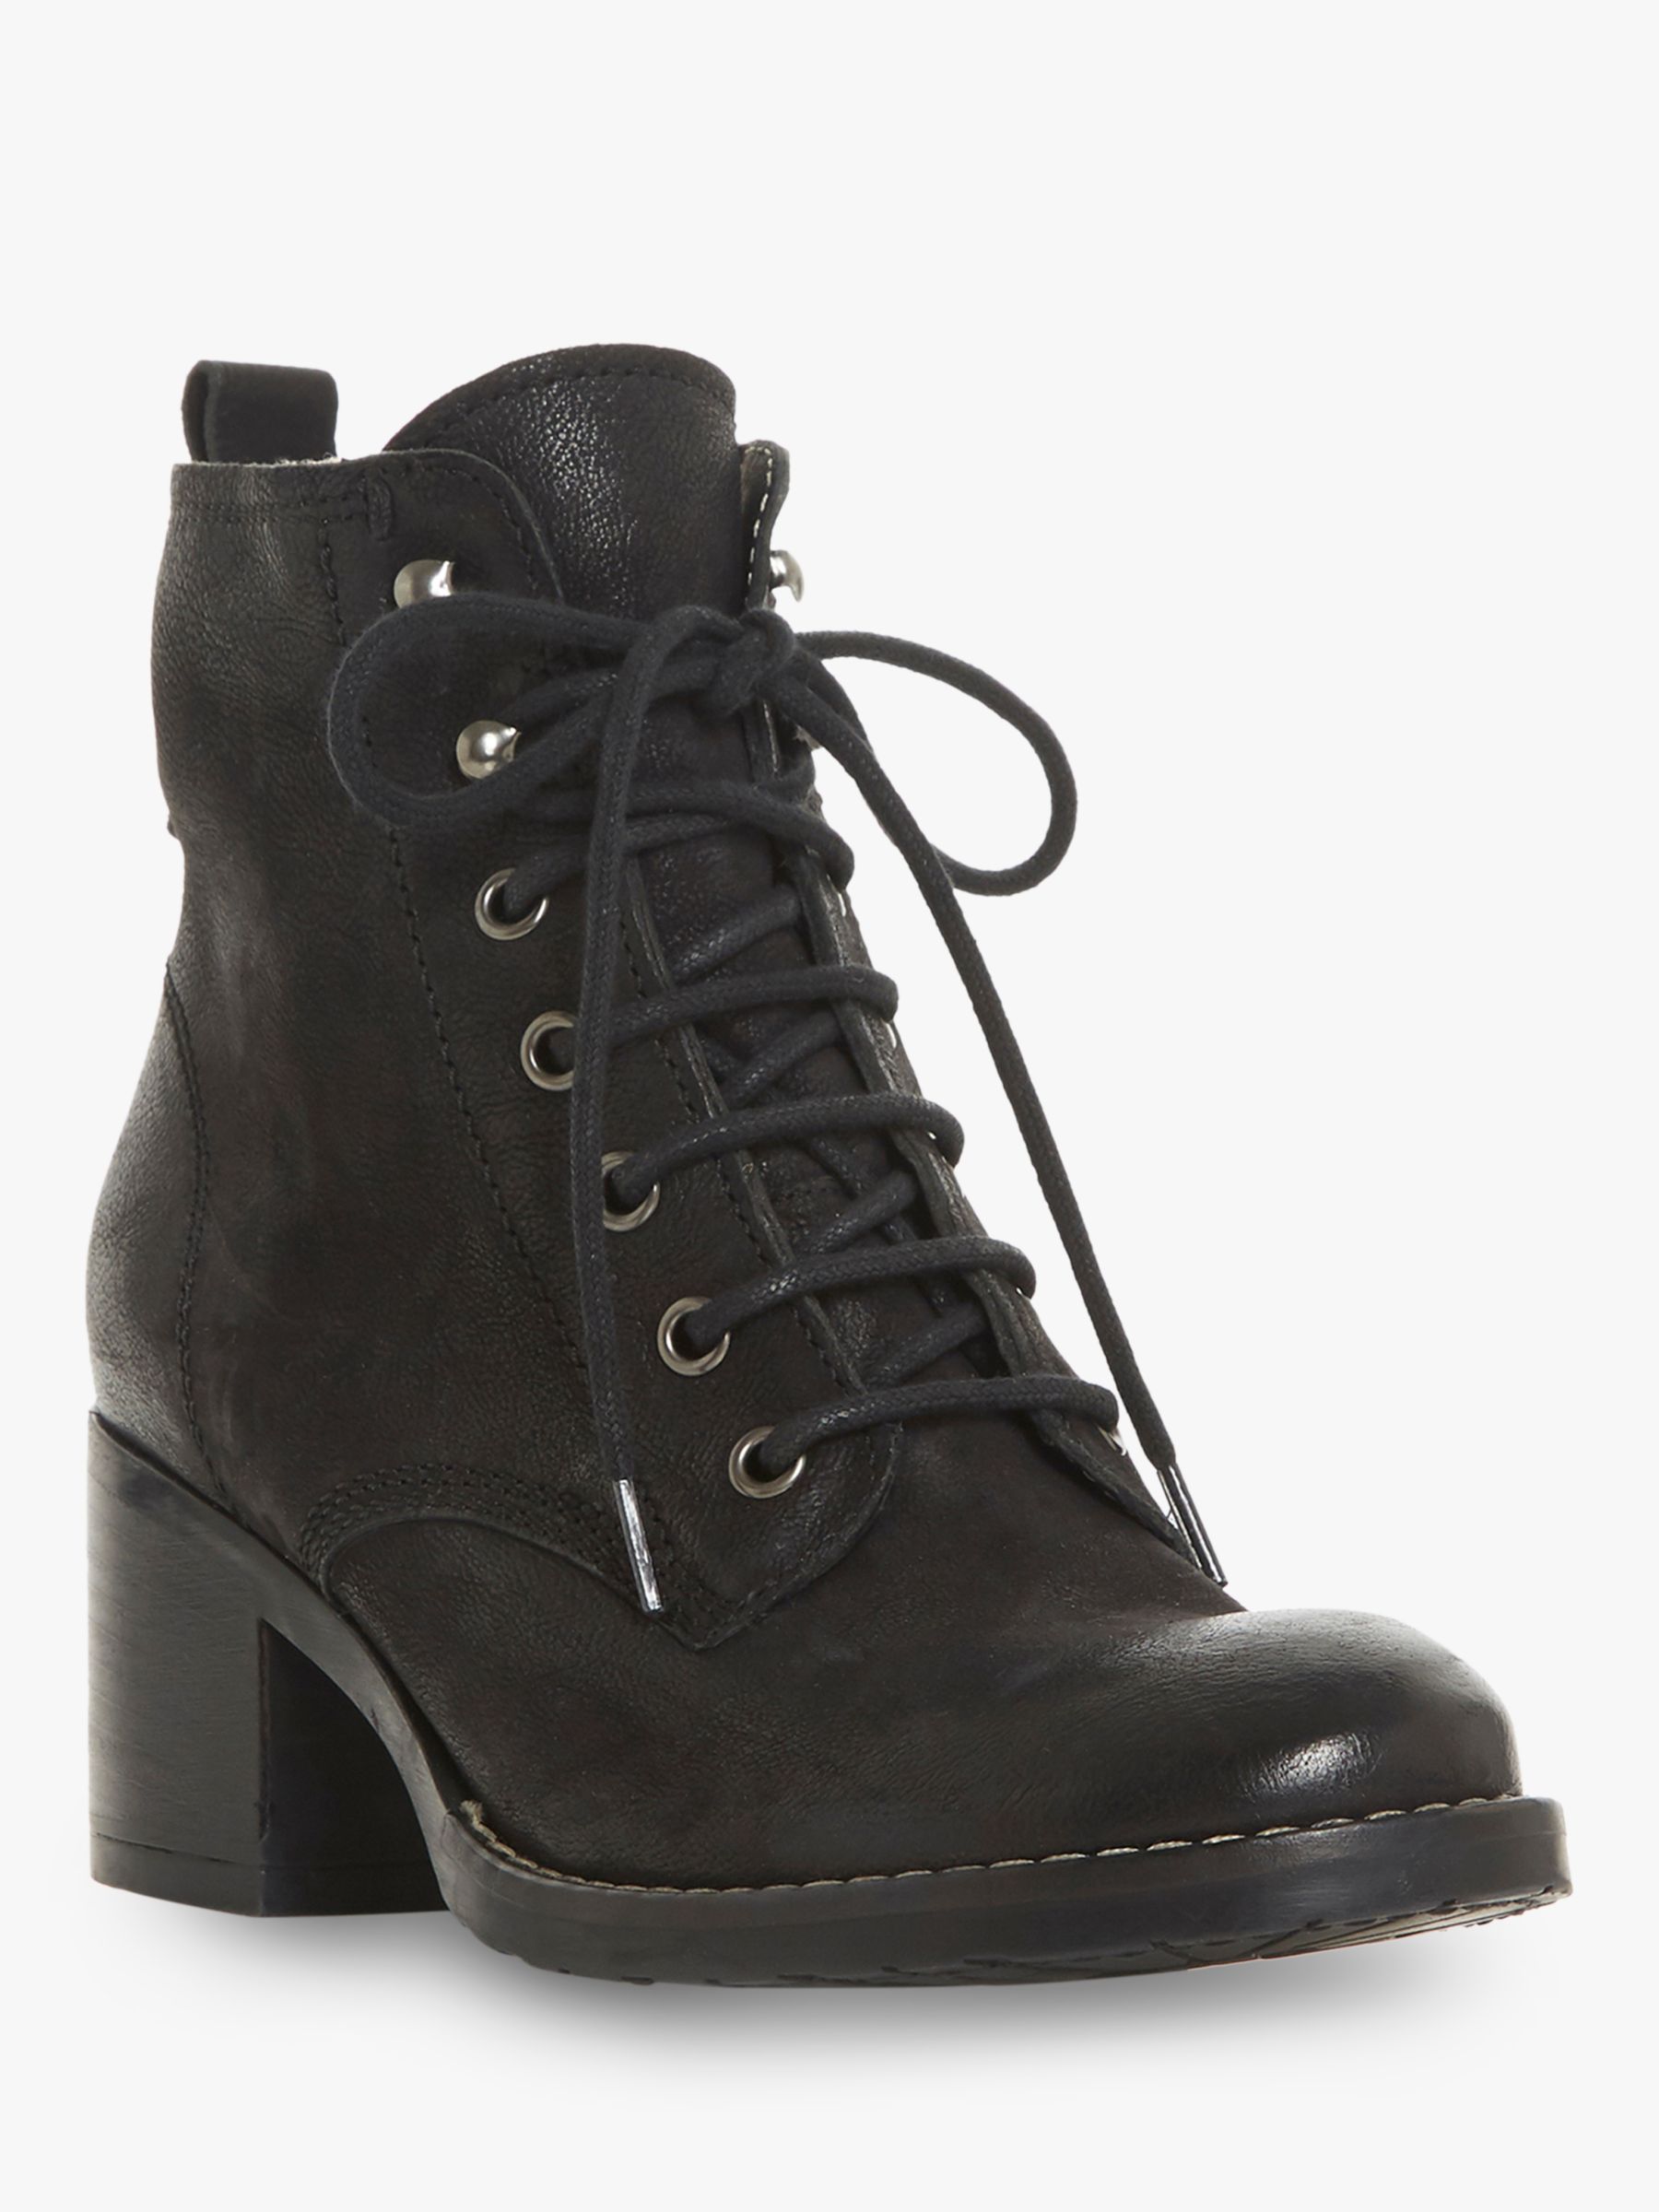 Dune Patsie D Leather Lace Up Ankle Boots Black Nubuck At John Lewis